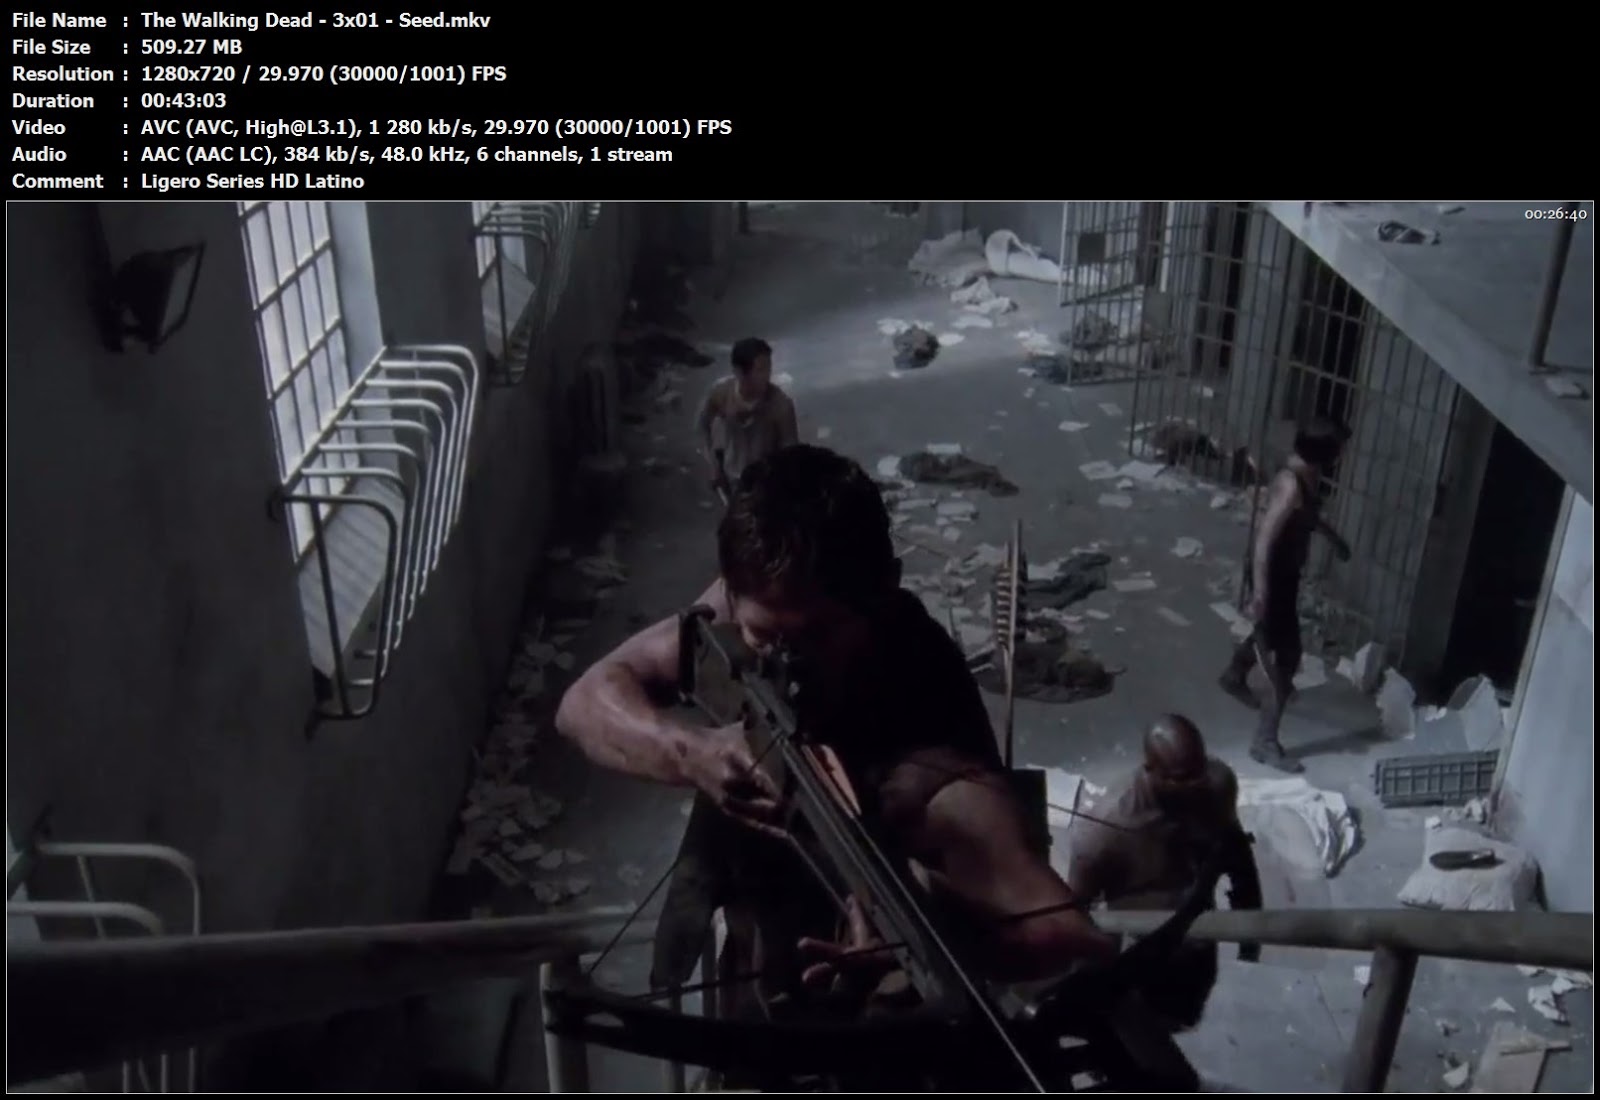 The Walking Dead (2010) Serie Completa 720p Latino The%2BWalking%2BDead%2B-%2B3x01%2B-%2BSeed.mkv